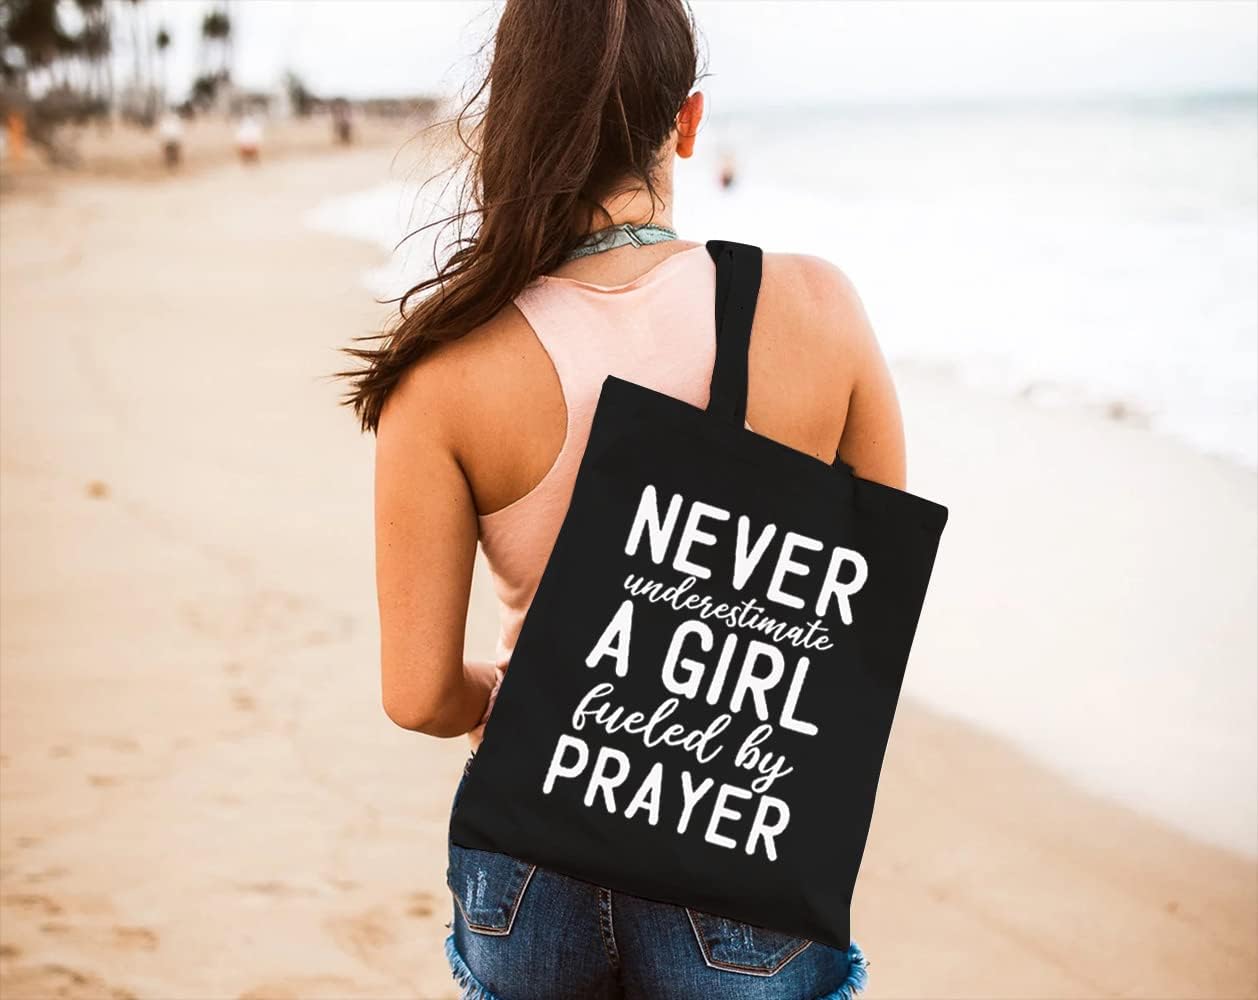 Never Underestimate A Girl Fueled By Prayer Christian Tote Bag claimedbygoddesigns